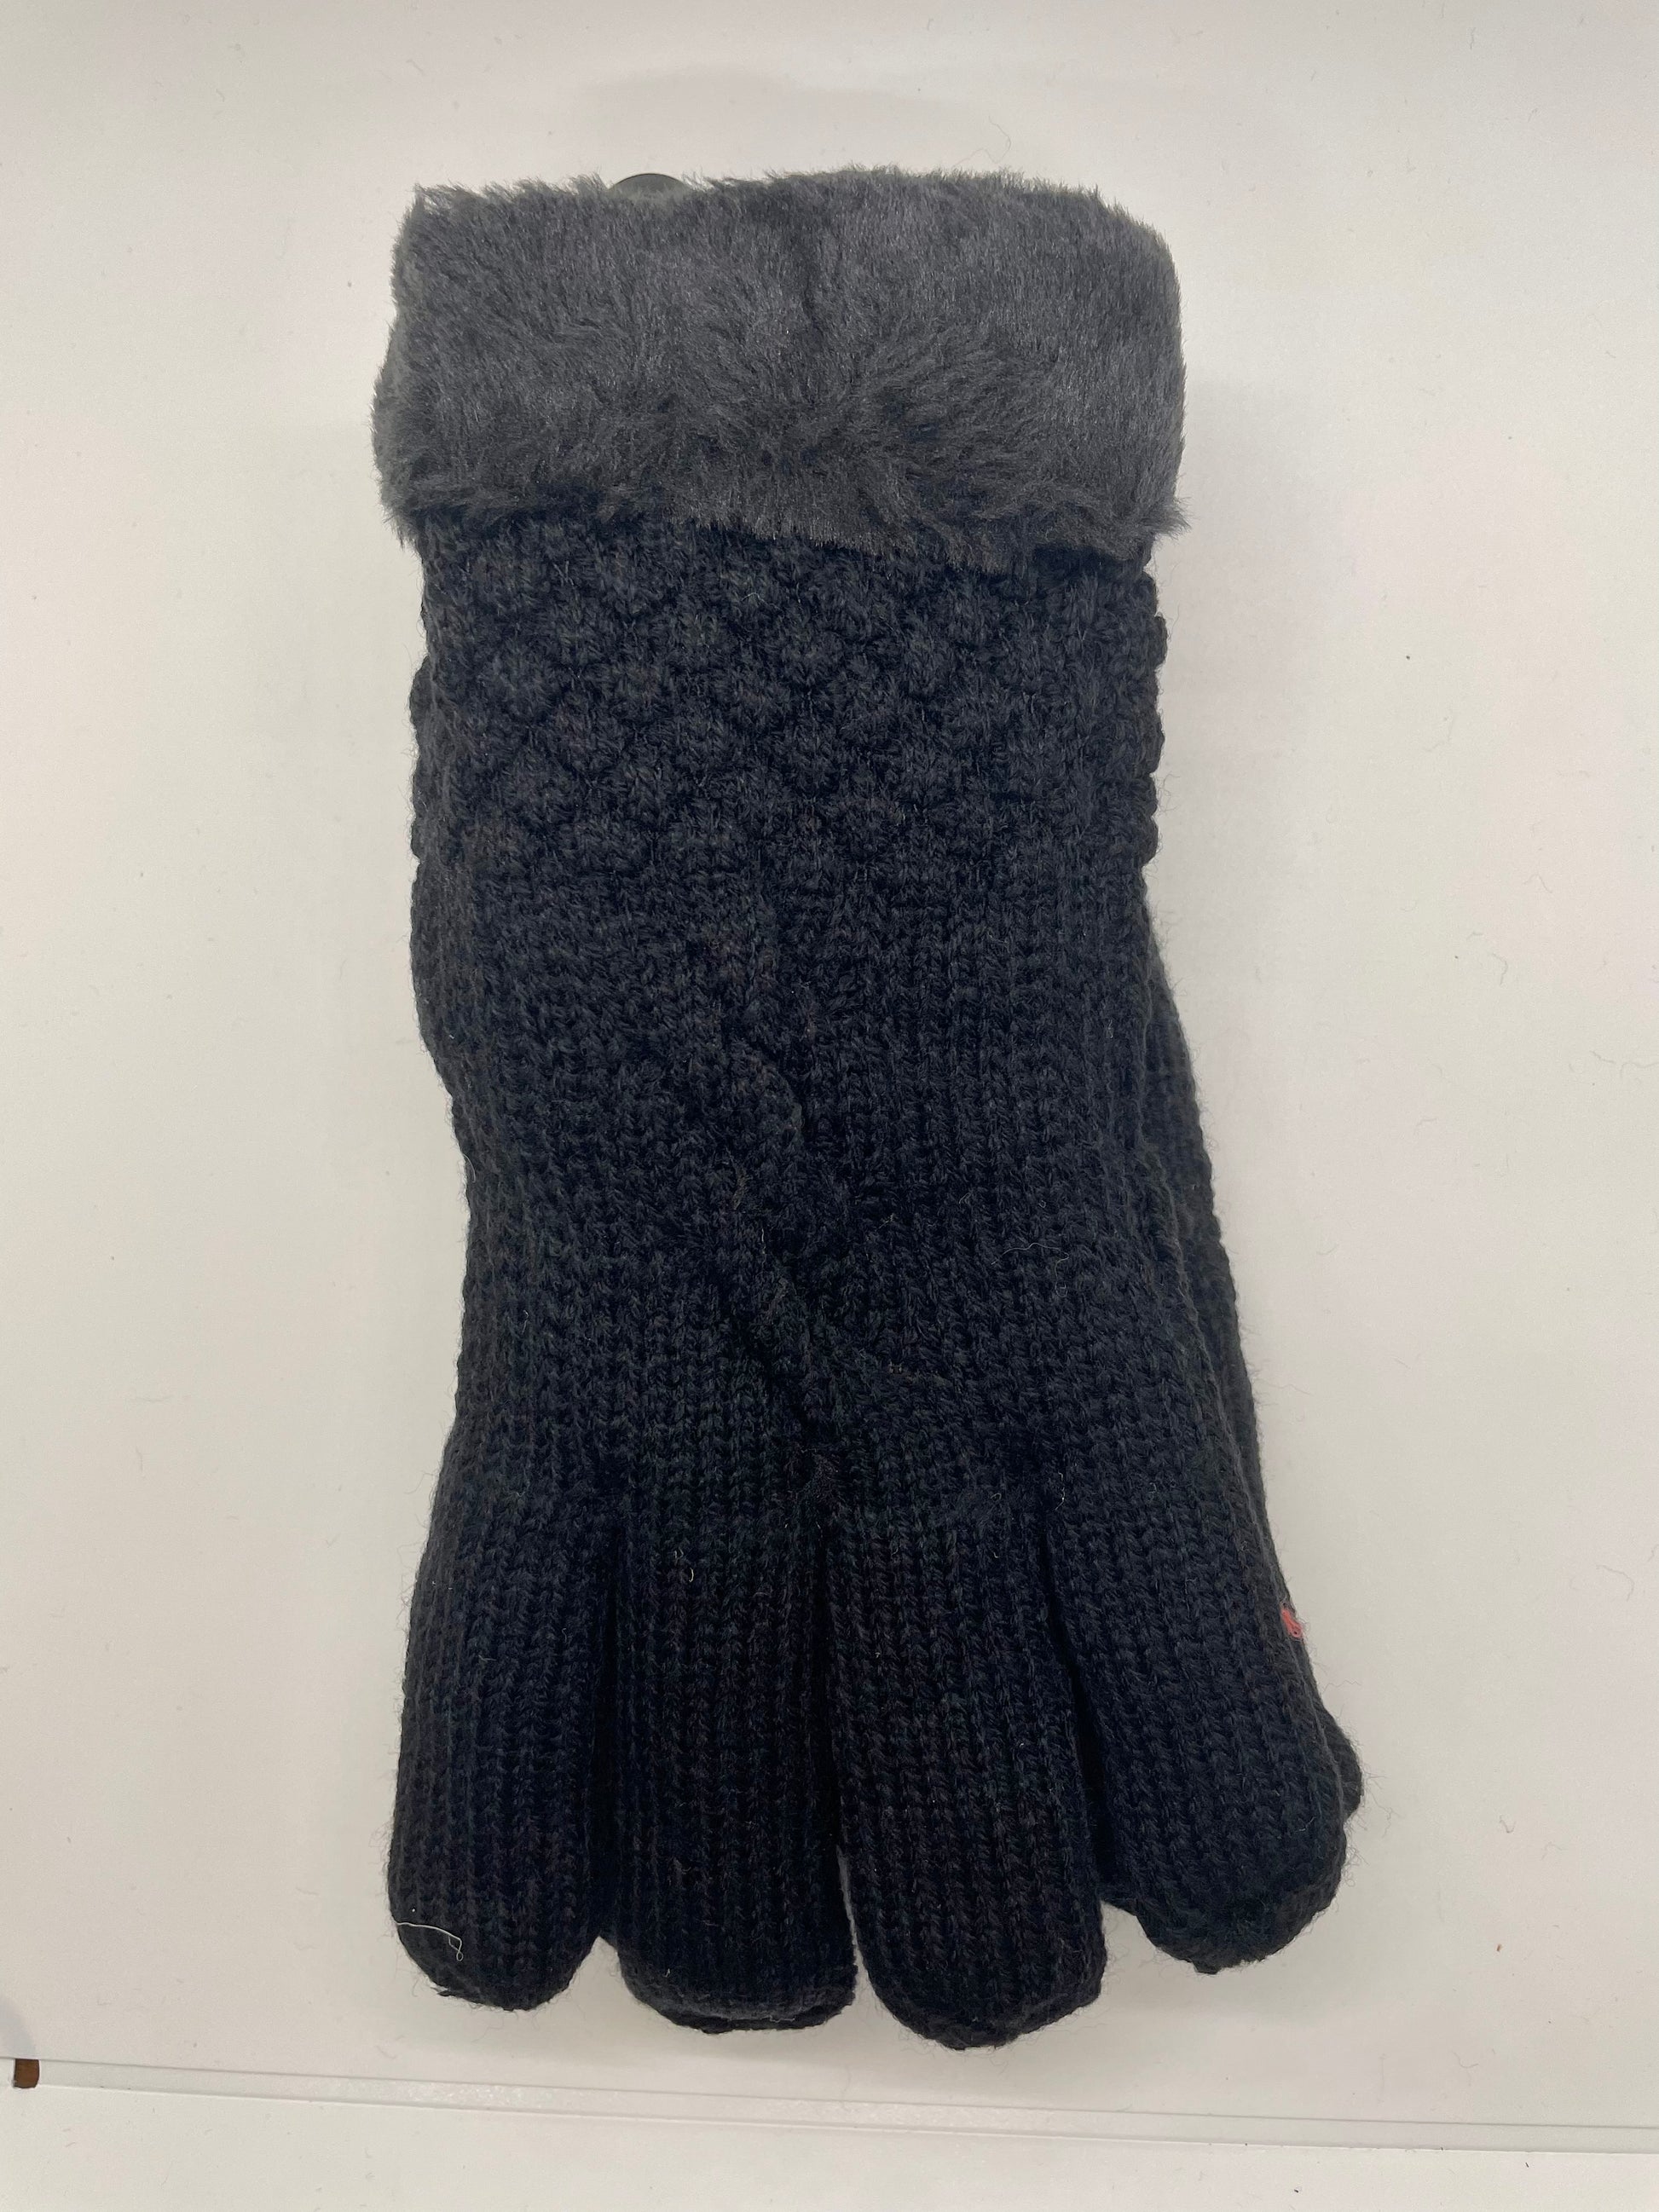 Black  women's winter gloves with a quilted texture